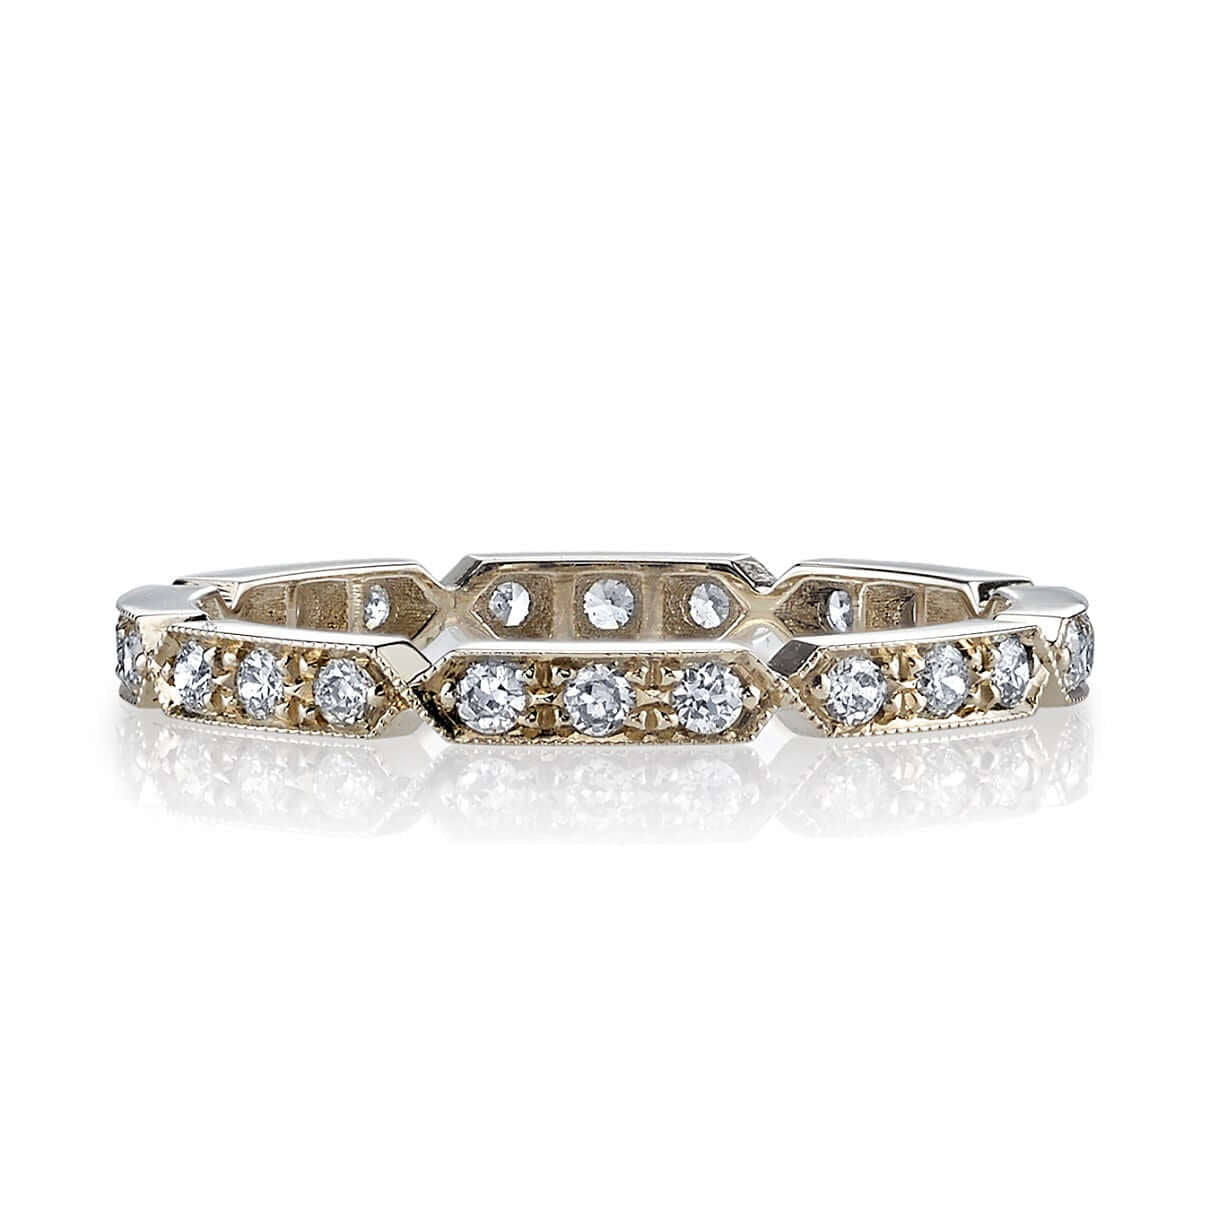 SINGLE STONE CARLY BAND | Approximately 0.30ctw G-H/VS old European cut diamonds prong set in a handcrafted geometric sectional eternity band. Approximate band width 2.1mm. Please inquire for additional customization.